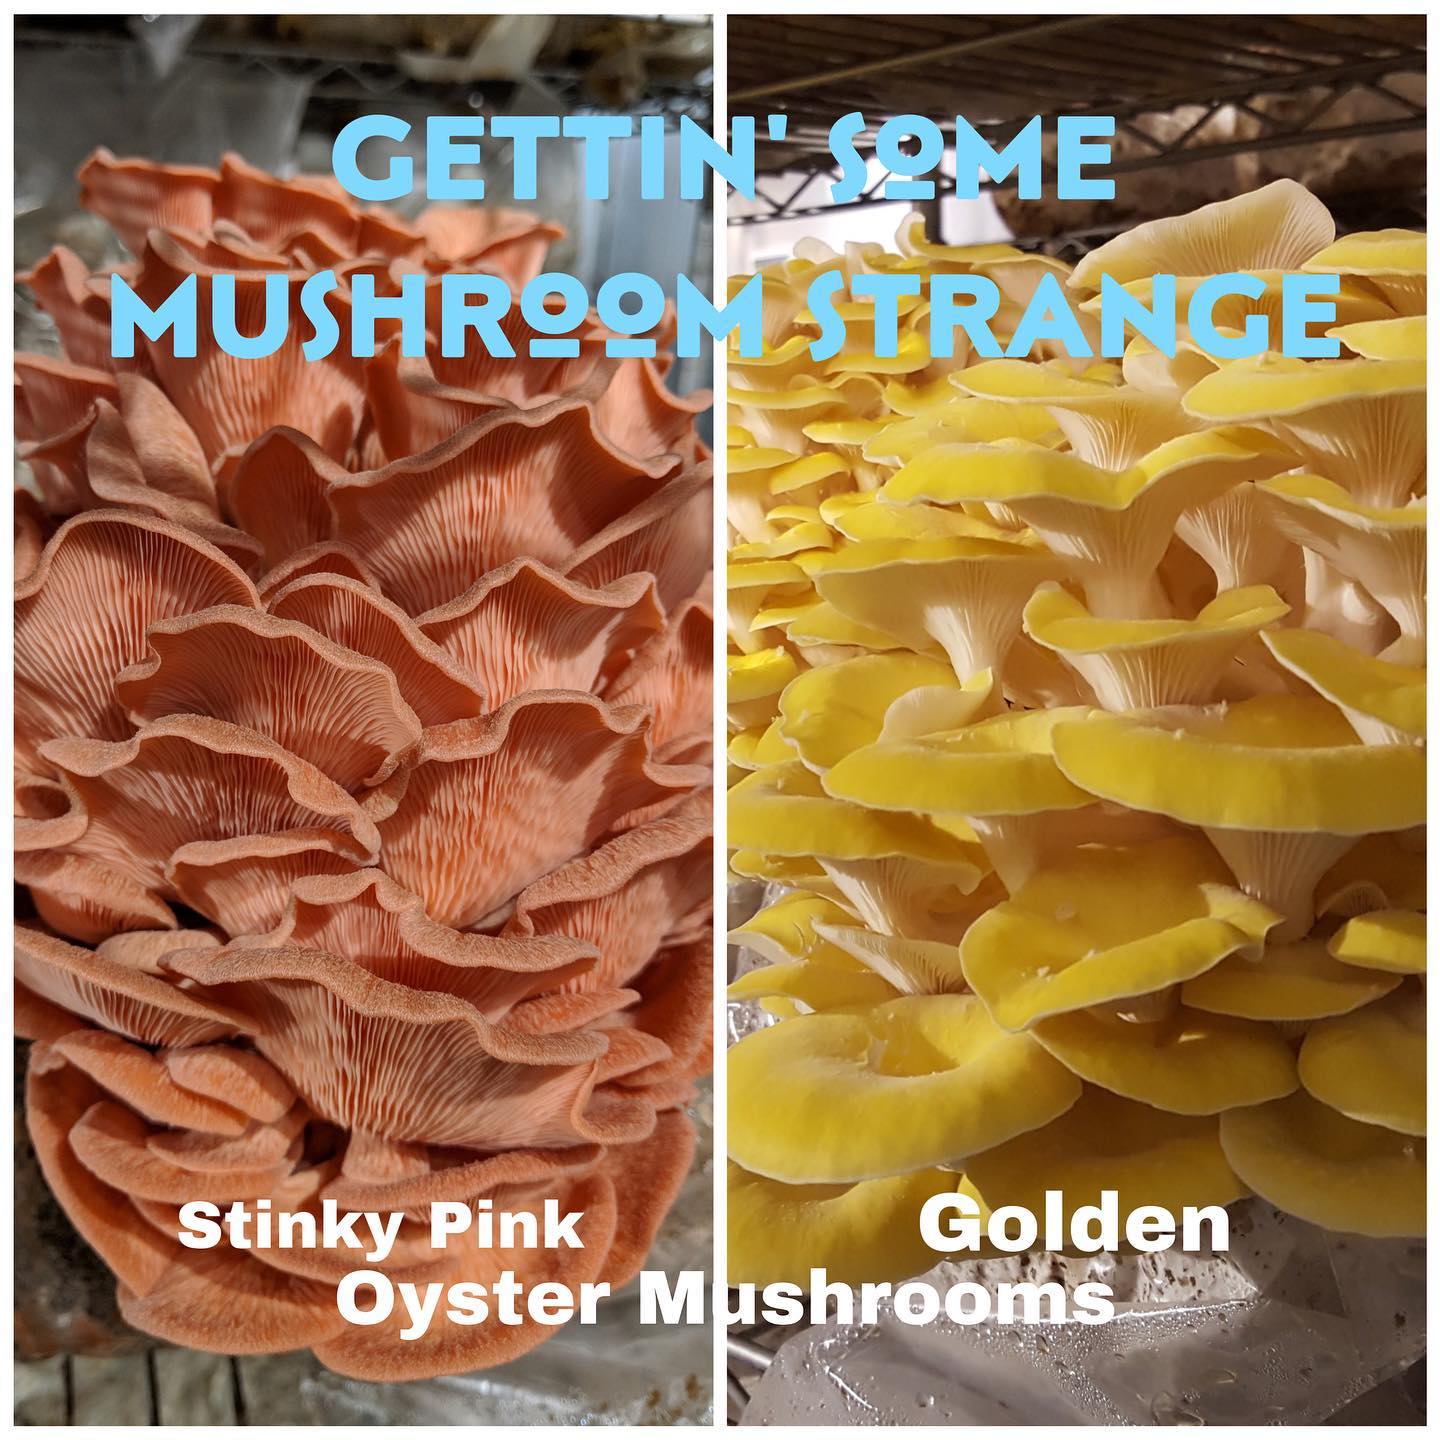 It’s been over four years since I’ve grown these varieties. Wanted some mushroom strange so here we are.
Just wanted to give you lucky chefs a heads up. Some of you will be receiving these lovelies in your order this week. If that turns out to be you, here’s some need to know info.
1) They cook up just like any other mushroom. Use in any application you normally would any other mushroom.
2) Sadly they do not keep their color when cooked.
3) They have a limited shelf-life as compared to other varieties. The pinks last about three days after harvesting before they start to wilt and earn one of their nicknames: the stinky pinks. Another nickname is the Georgia O’Queef oyster.  The label abbreviation on the blocks for the variety is VAG. You get the idea and now you know why I don’t grow these on the regular.

The golds will hold up for a week at minimum but after about 3 or 4 days, when you open the bag, instead of smelling watermelon rind and cinnamon, you are hit with a strong whiff of fresh caught bass. Fortunately that smell doesn’t remain upon cooking.

I will be harvesting these mushrooms on the day you receive them to ensure the maximum shelf life on your end.

This is a one time dealio so if you’re one of the “lucky” recipients, don’t hesitate to reach out via my cell or email, if you have any questions as I’m not active on social media for now. ❤️🍄❤️🍄❤️🍄